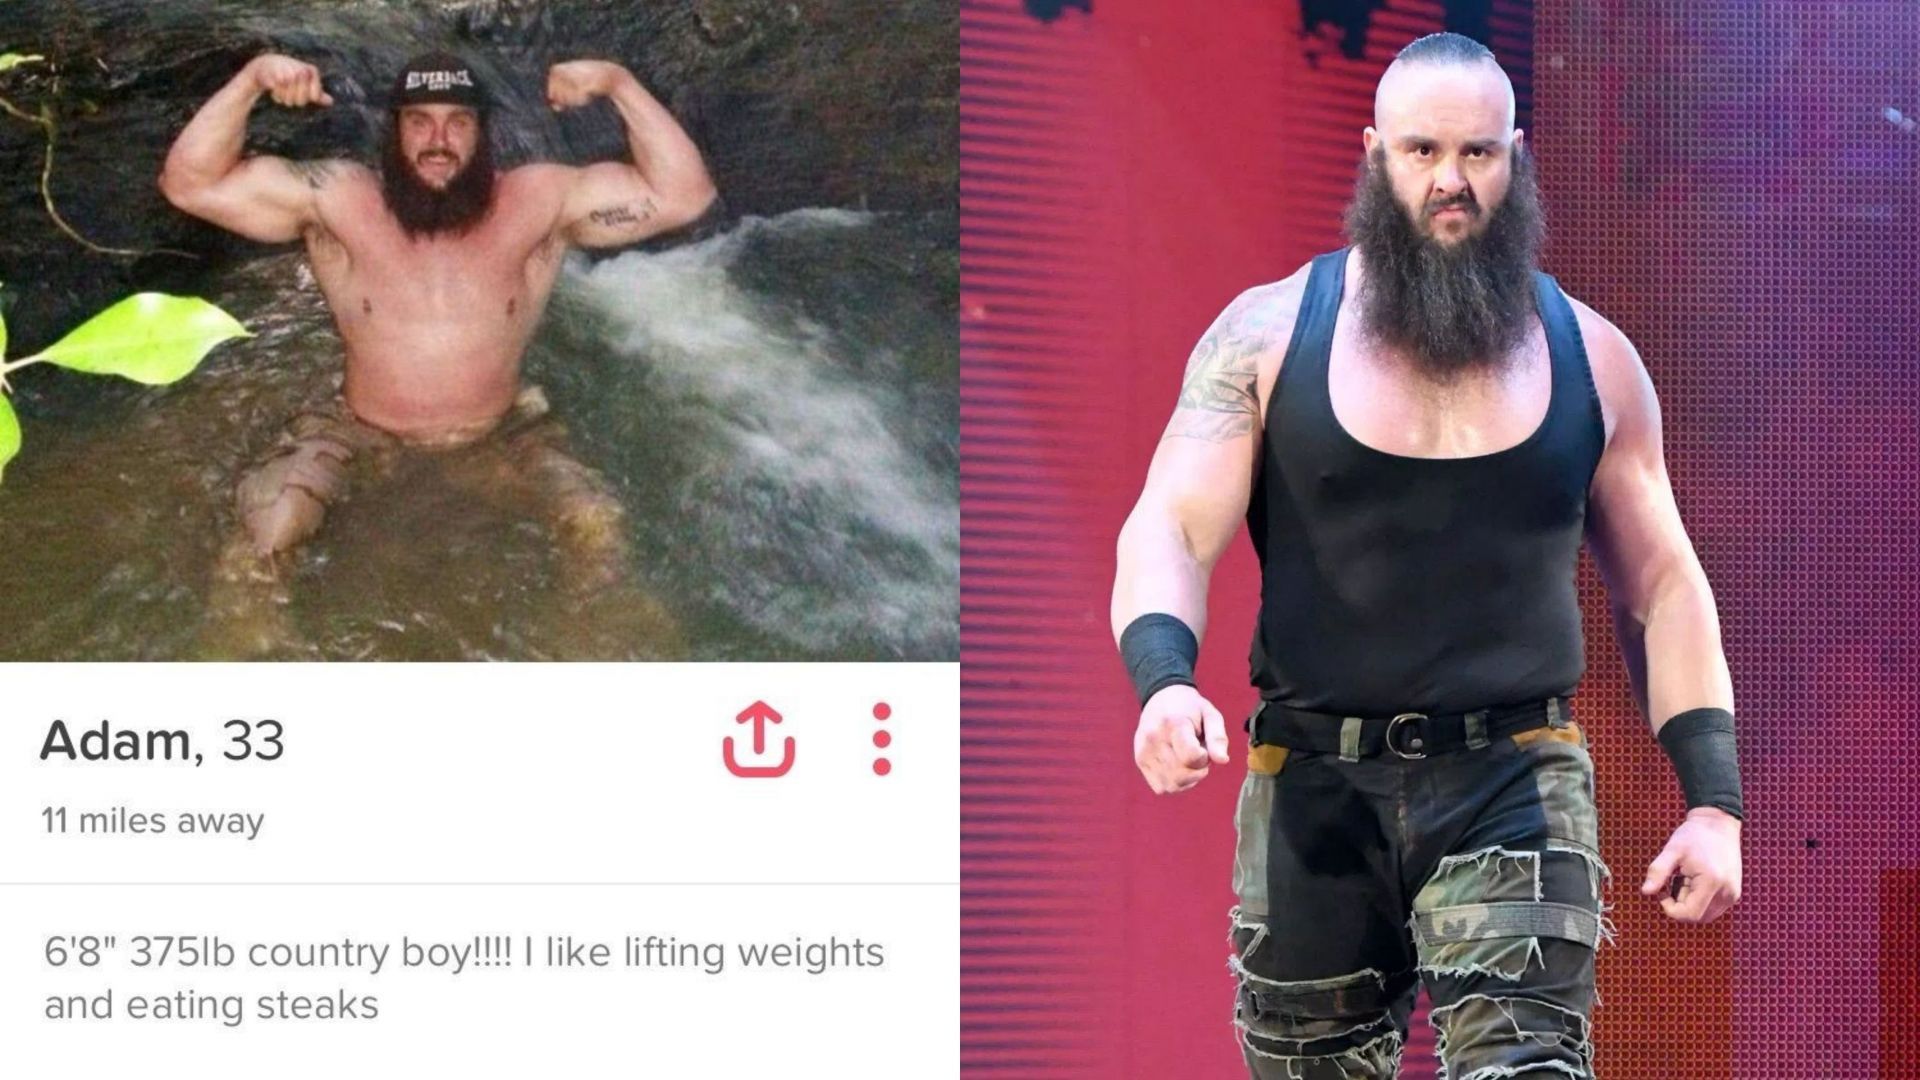 Braun Strowman reportedly used Tinder